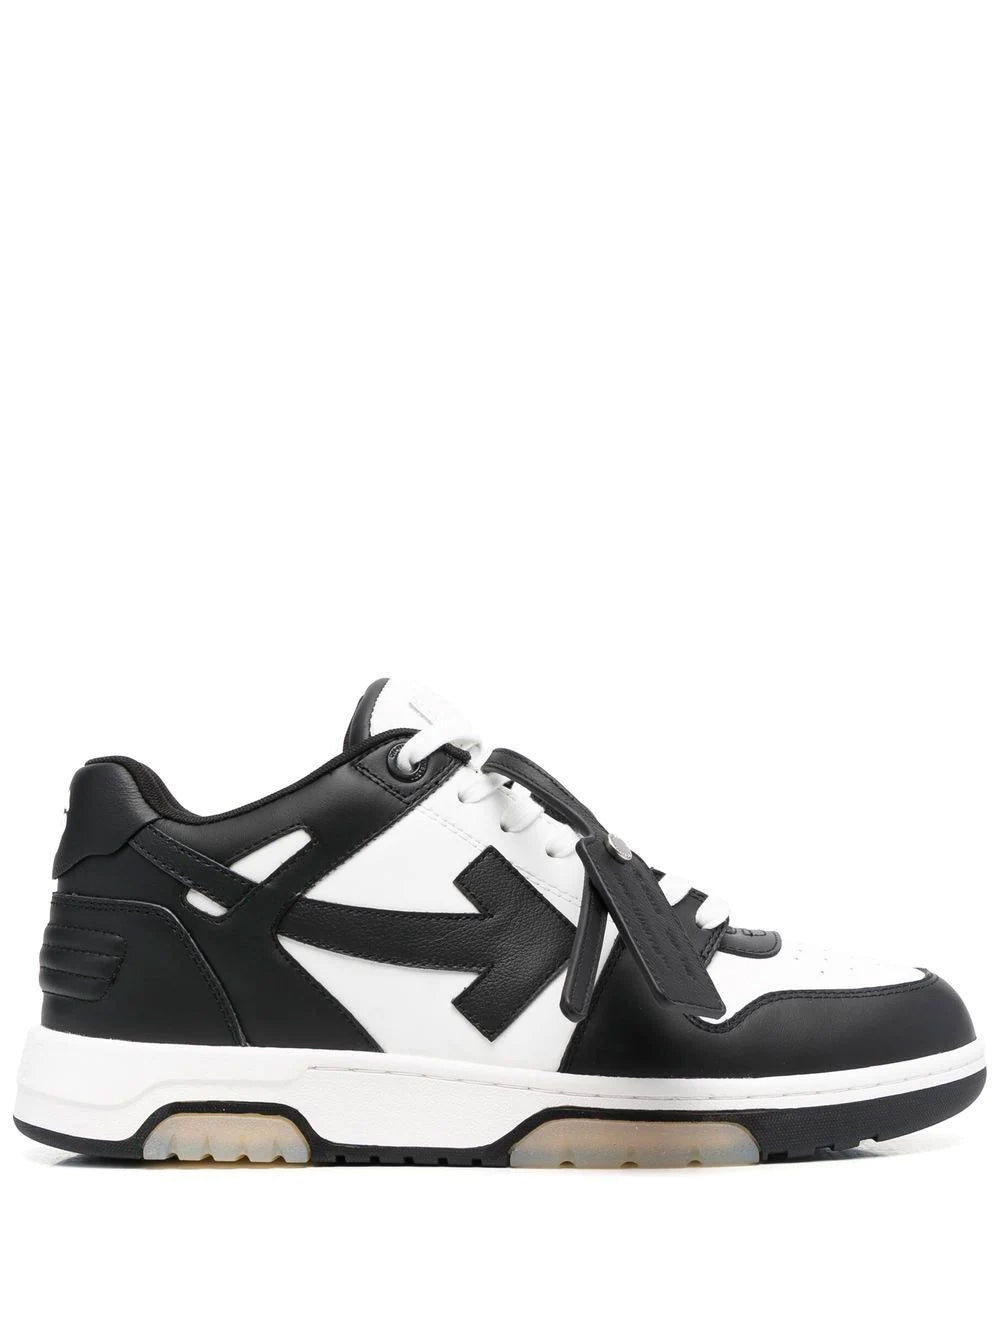 OFF-WHITE Out Of Office Low Top Sneakers White/Black - MAISONDEFASHION.COM